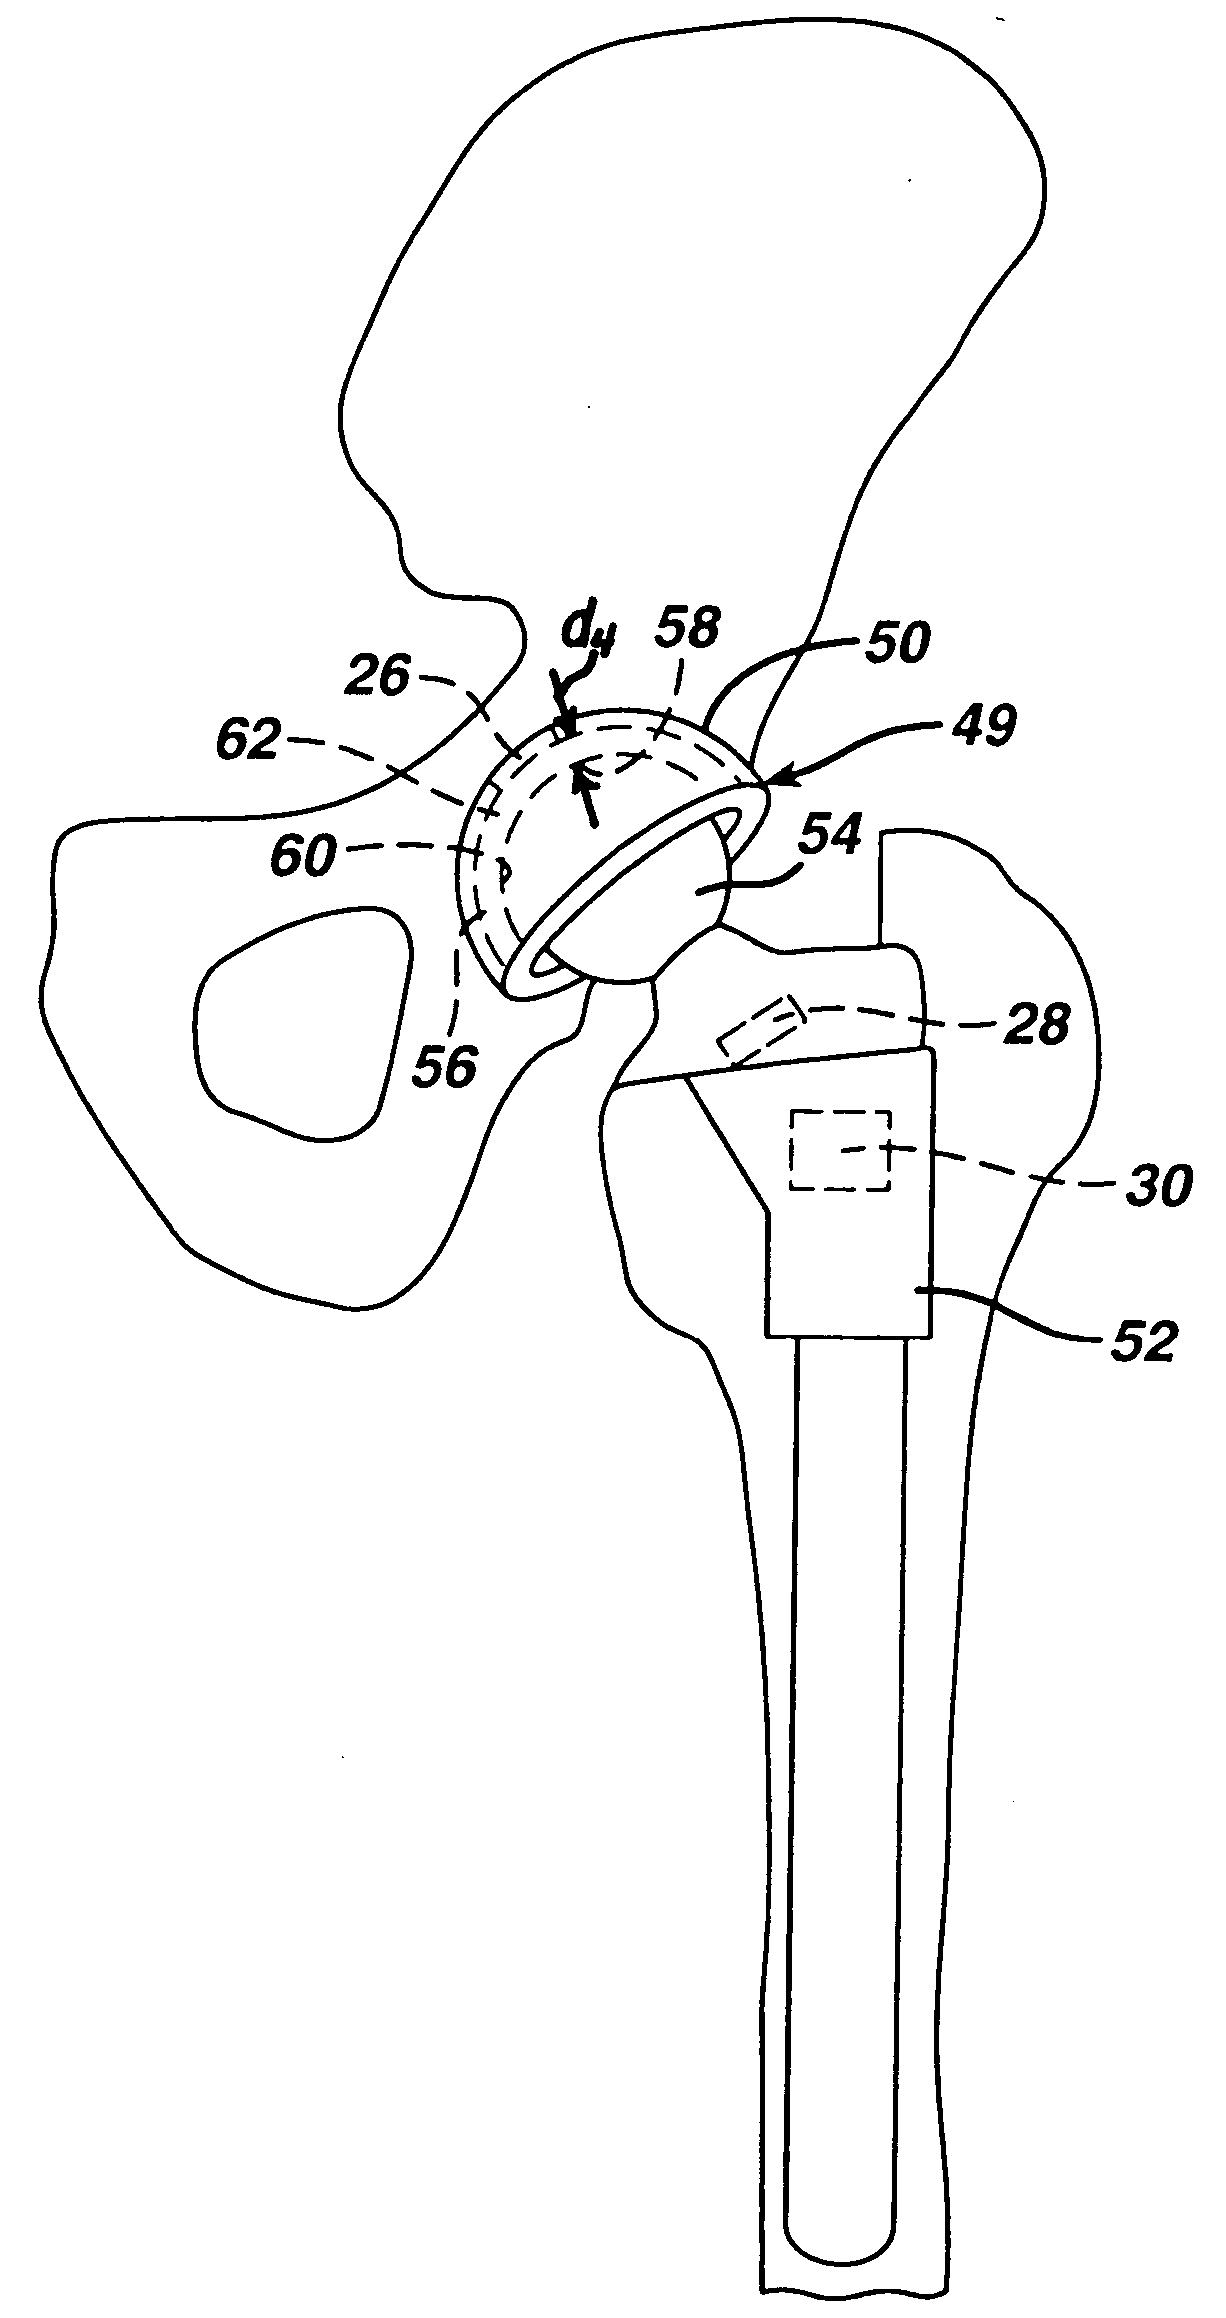 In vivo joint space measurement device and method